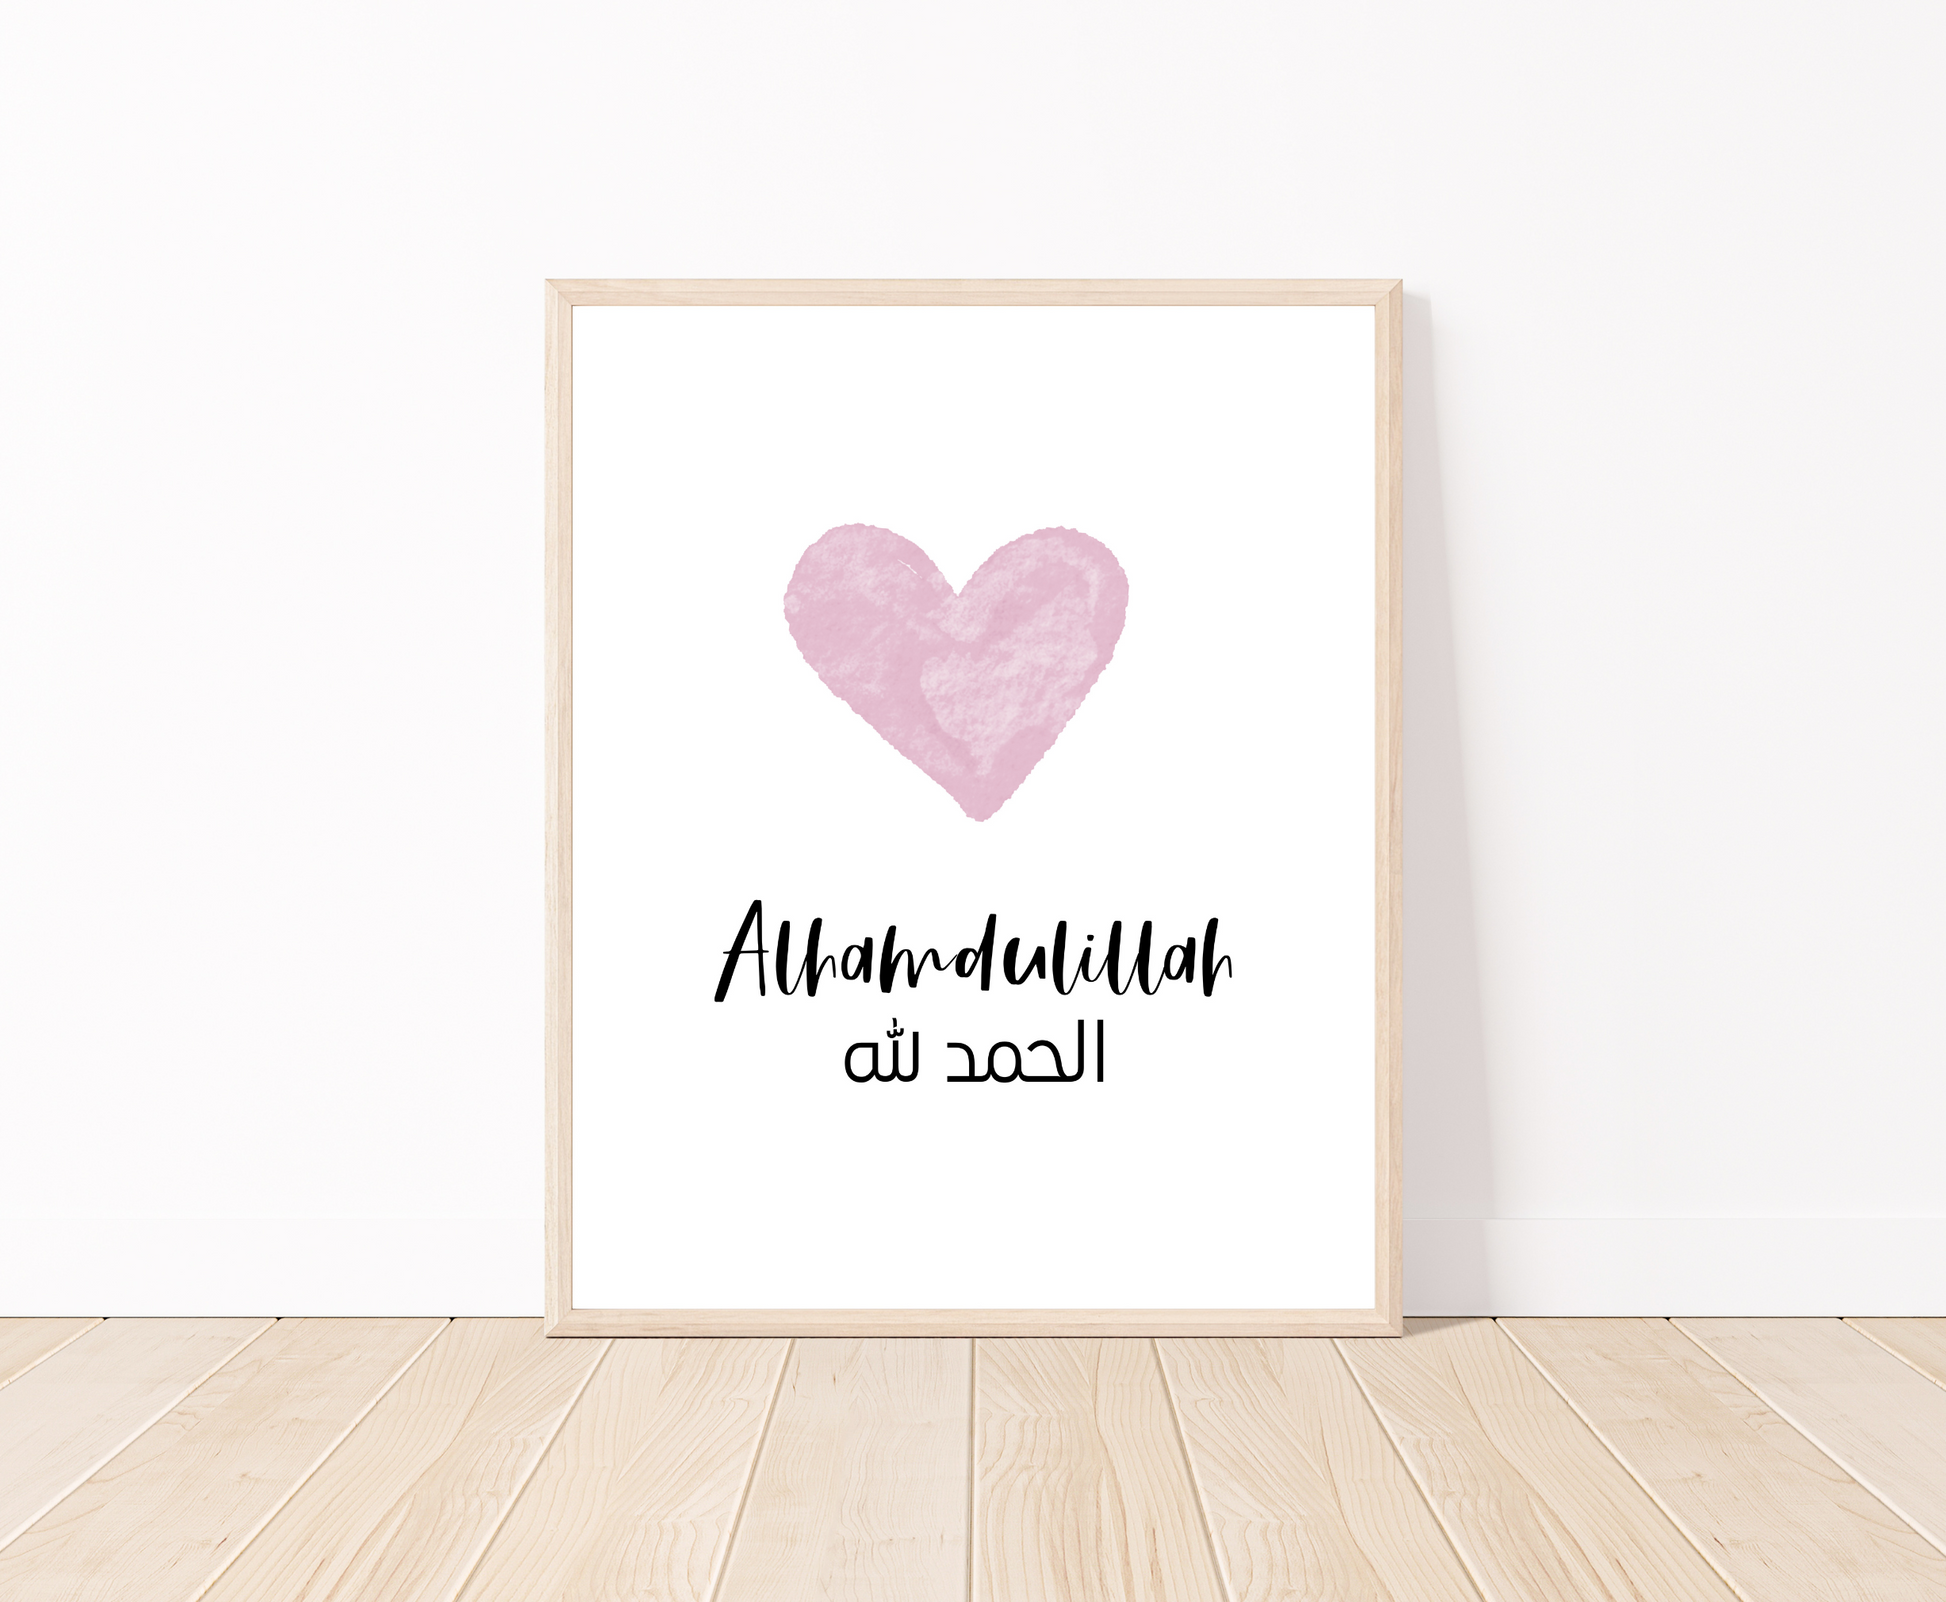 A digital print placed on a white wall and parquet flooring showing a pink heart with a piece of writing below that says: “Alhamdulillah”.